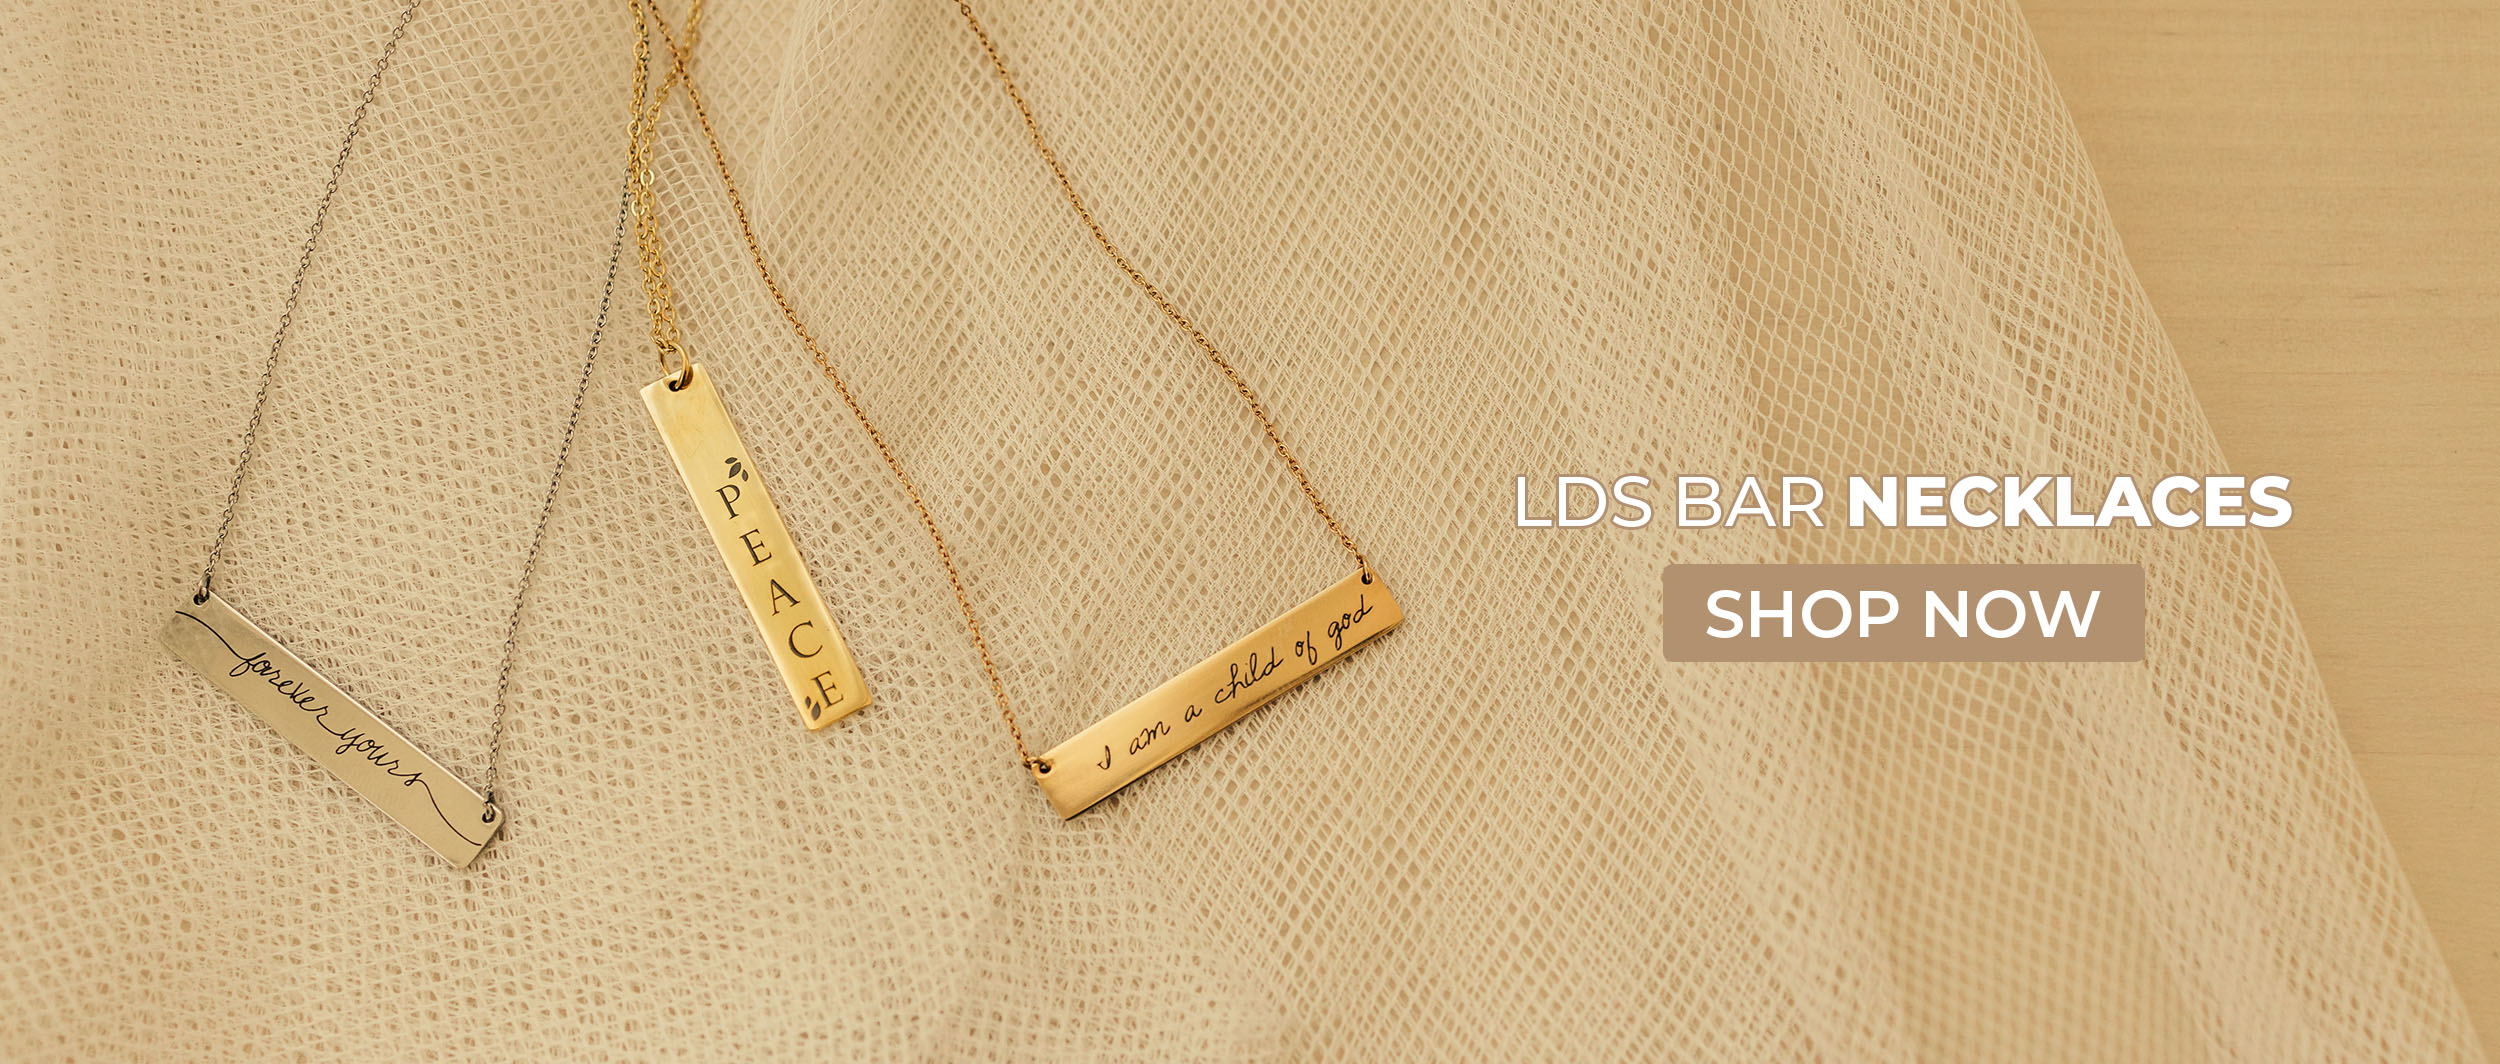 LDS Jewelry - Bar Necklaces